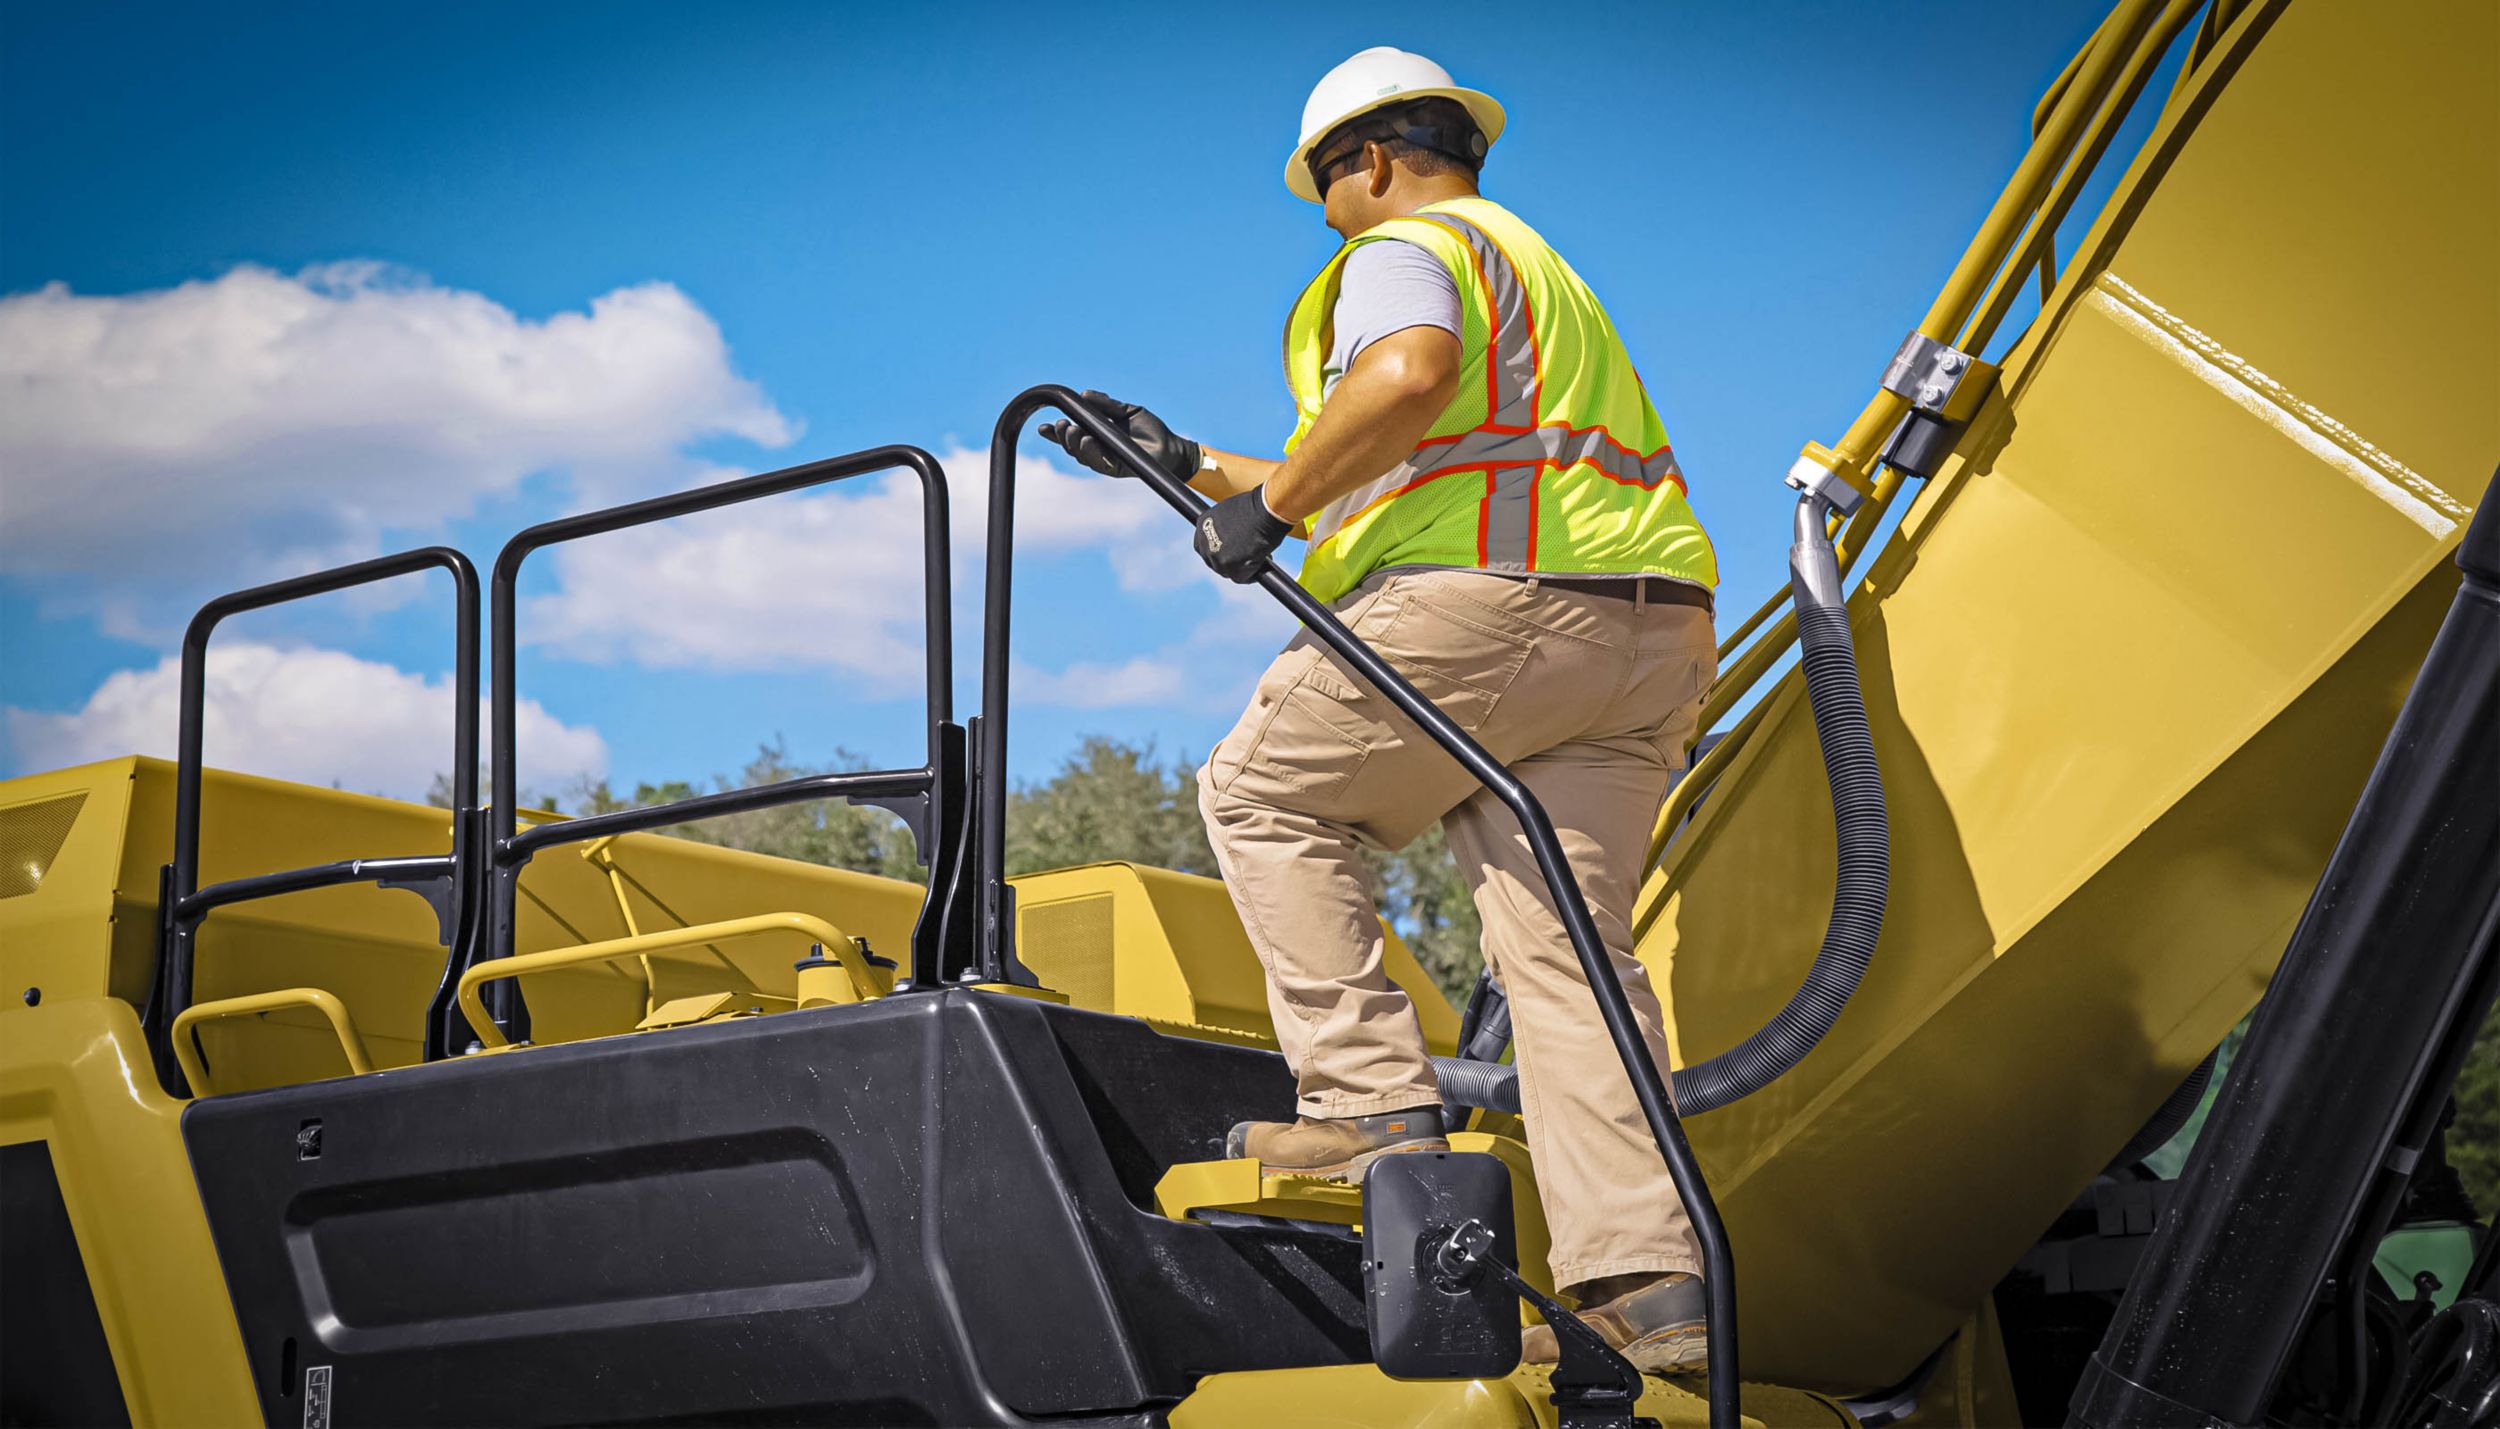 Cat 352 Hydraulic Excavator - BUILT-IN SAFETY FEATURES